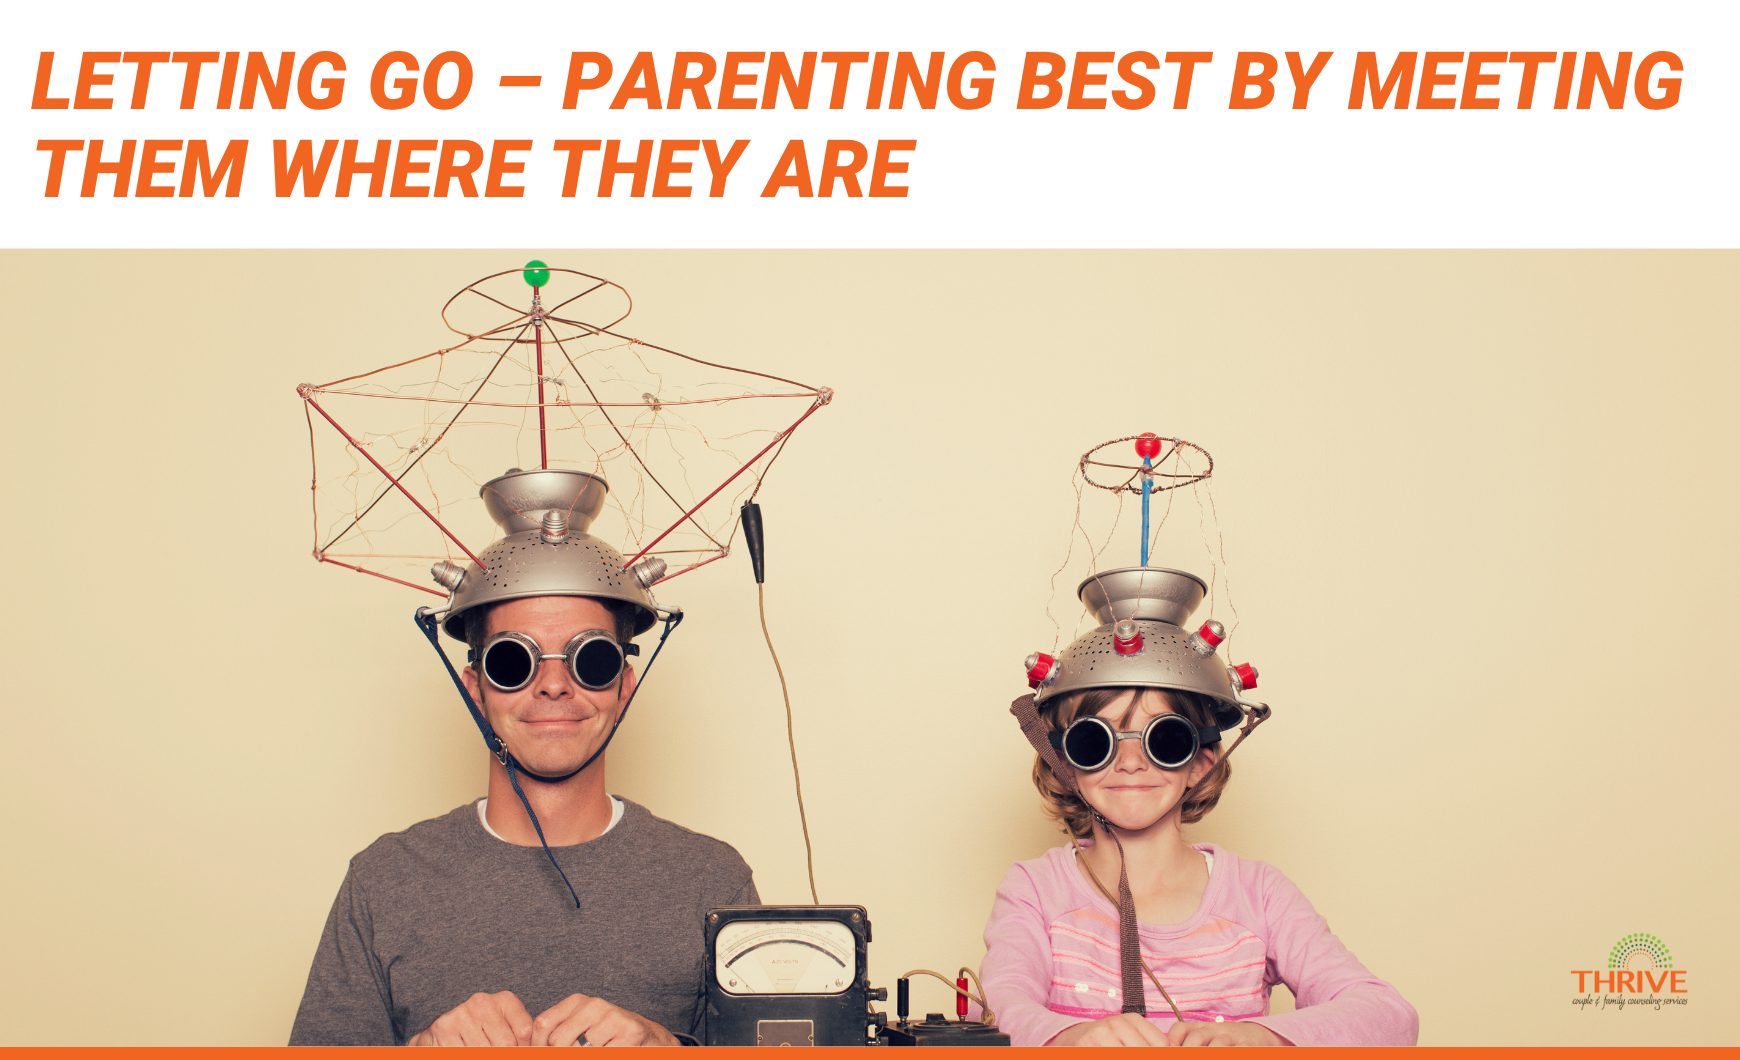 Orange text that reads "Letting Go - Parenting Best by Meeting Them Where They Are" above a photo of a man and a child sitting next to each other wearing zany helmets.